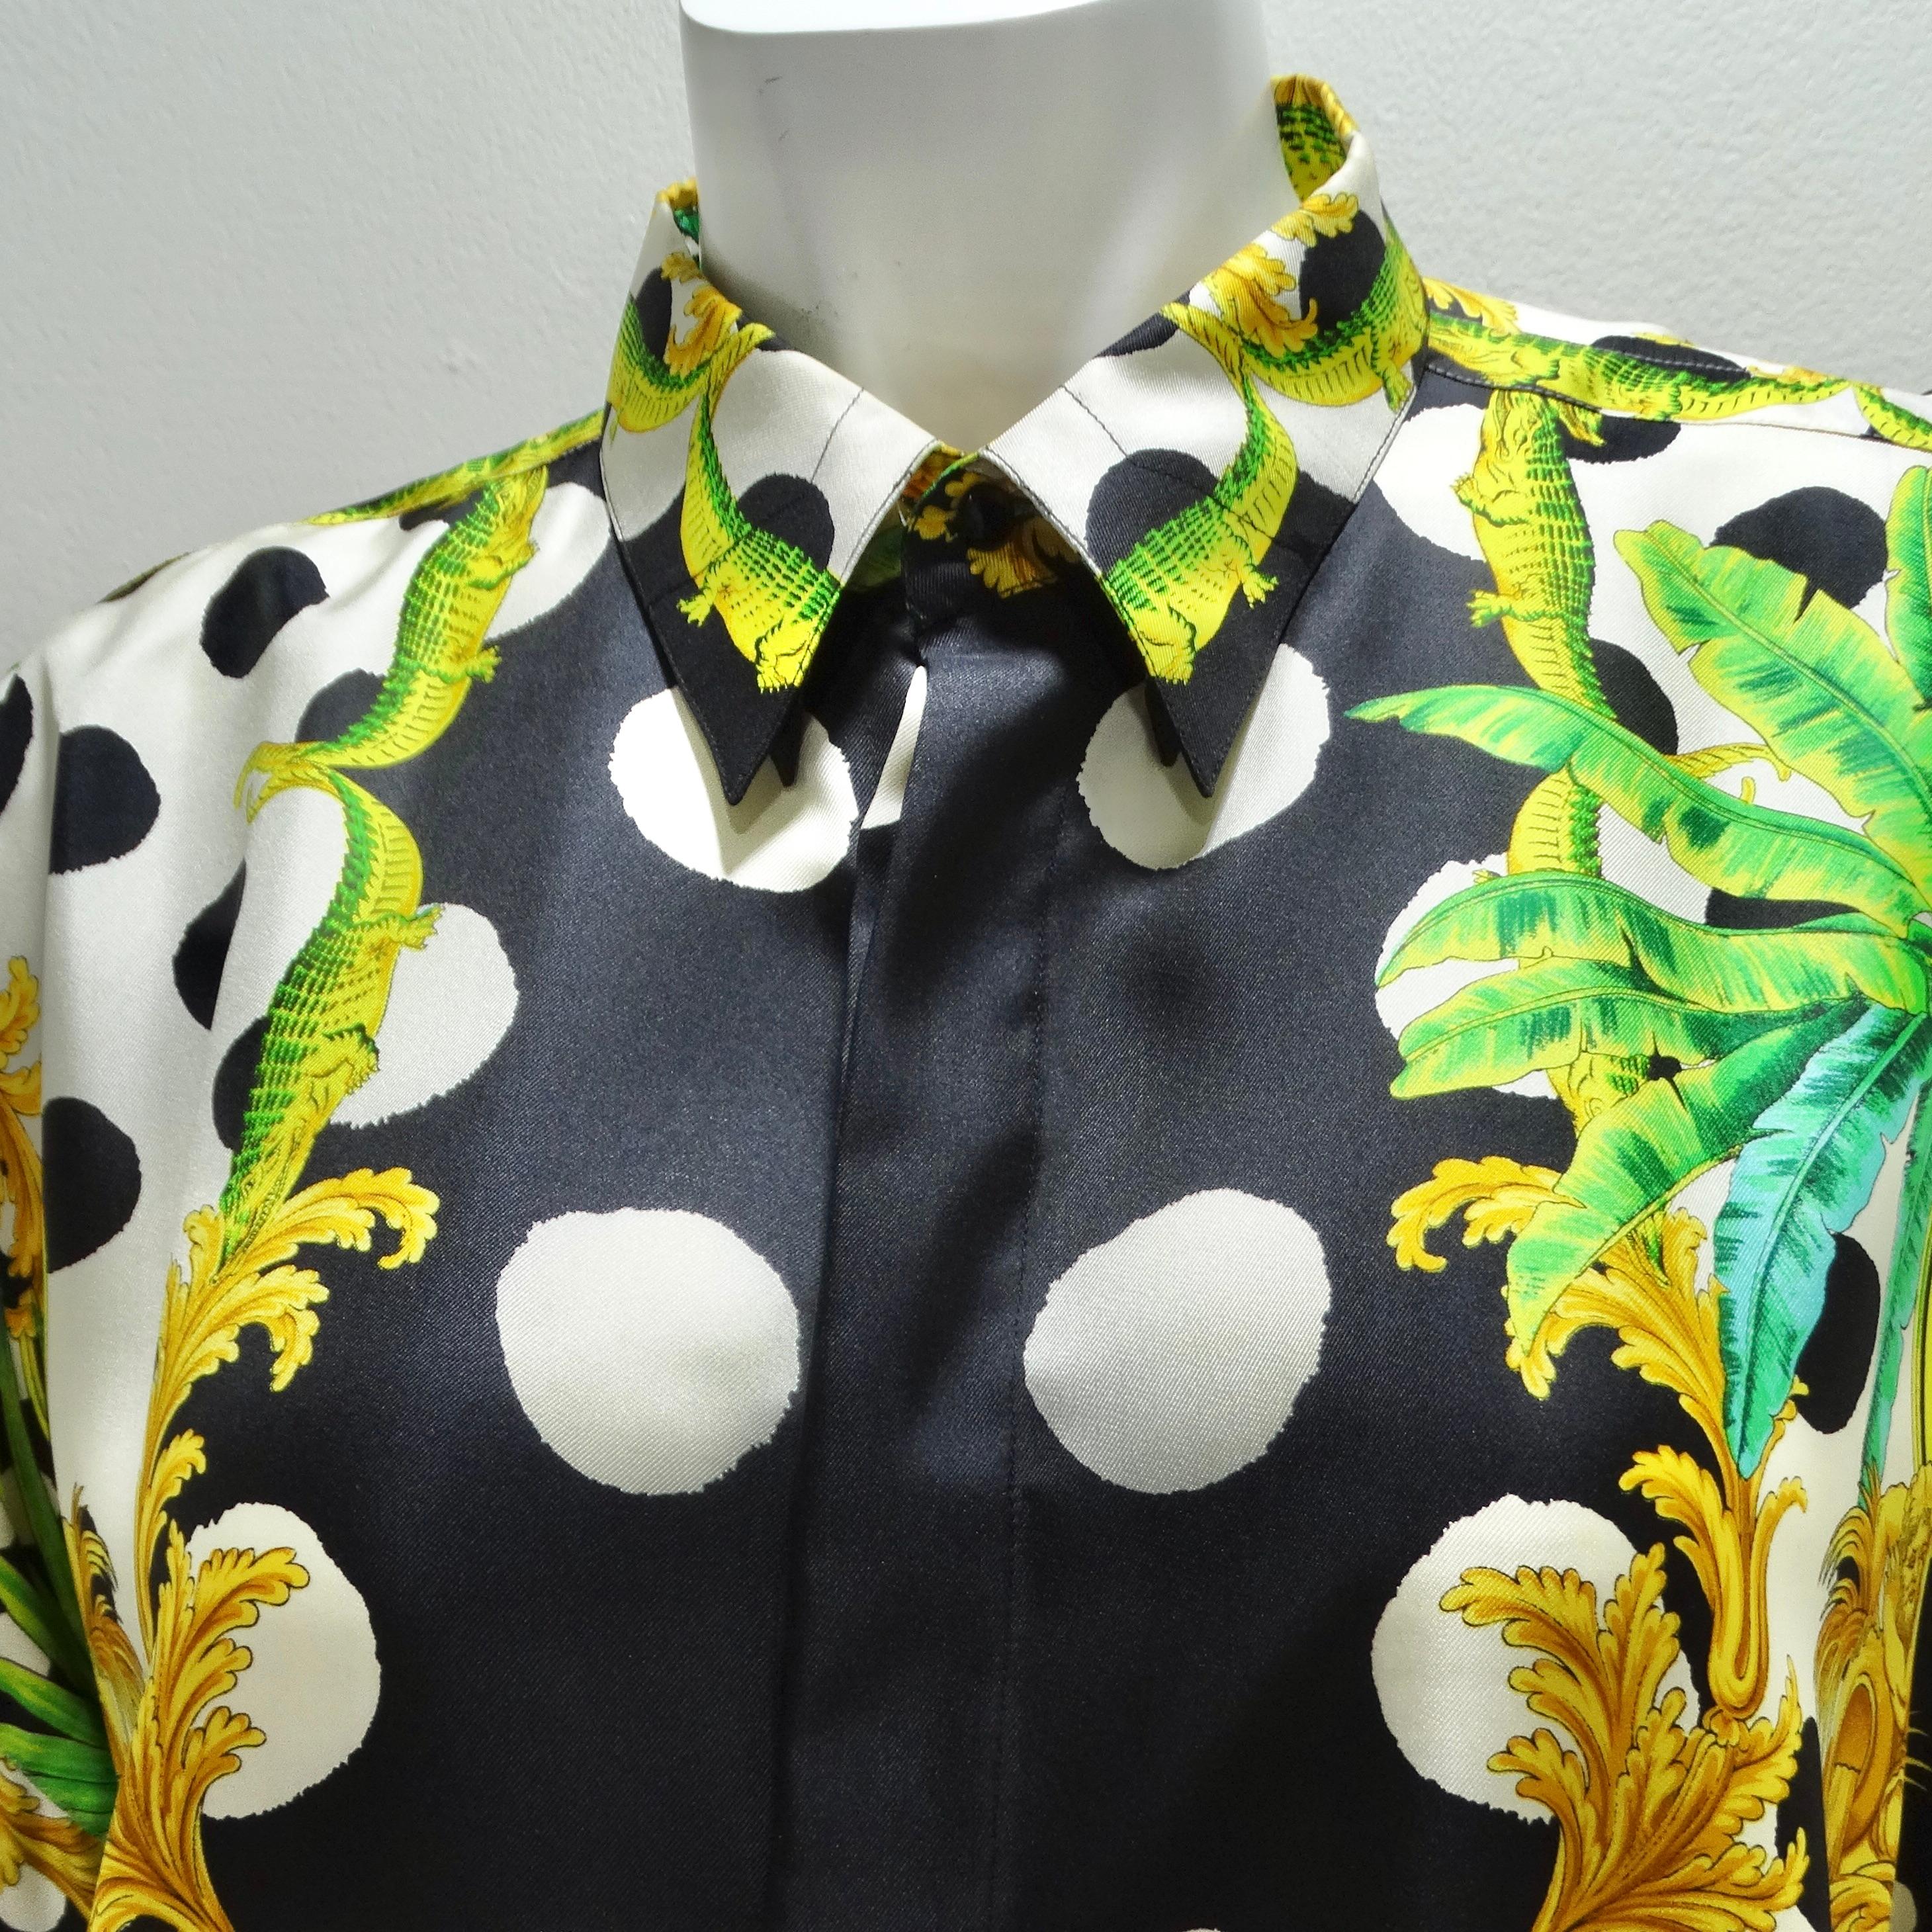 Introducing the iconic Gianni Versace 1990s Miami Collection Silk Printed Shirt, a stunning and statement-making piece that captures the essence of Versace's bold and vibrant aesthetic. Crafted from luxurious silk, this button-up collared shirt